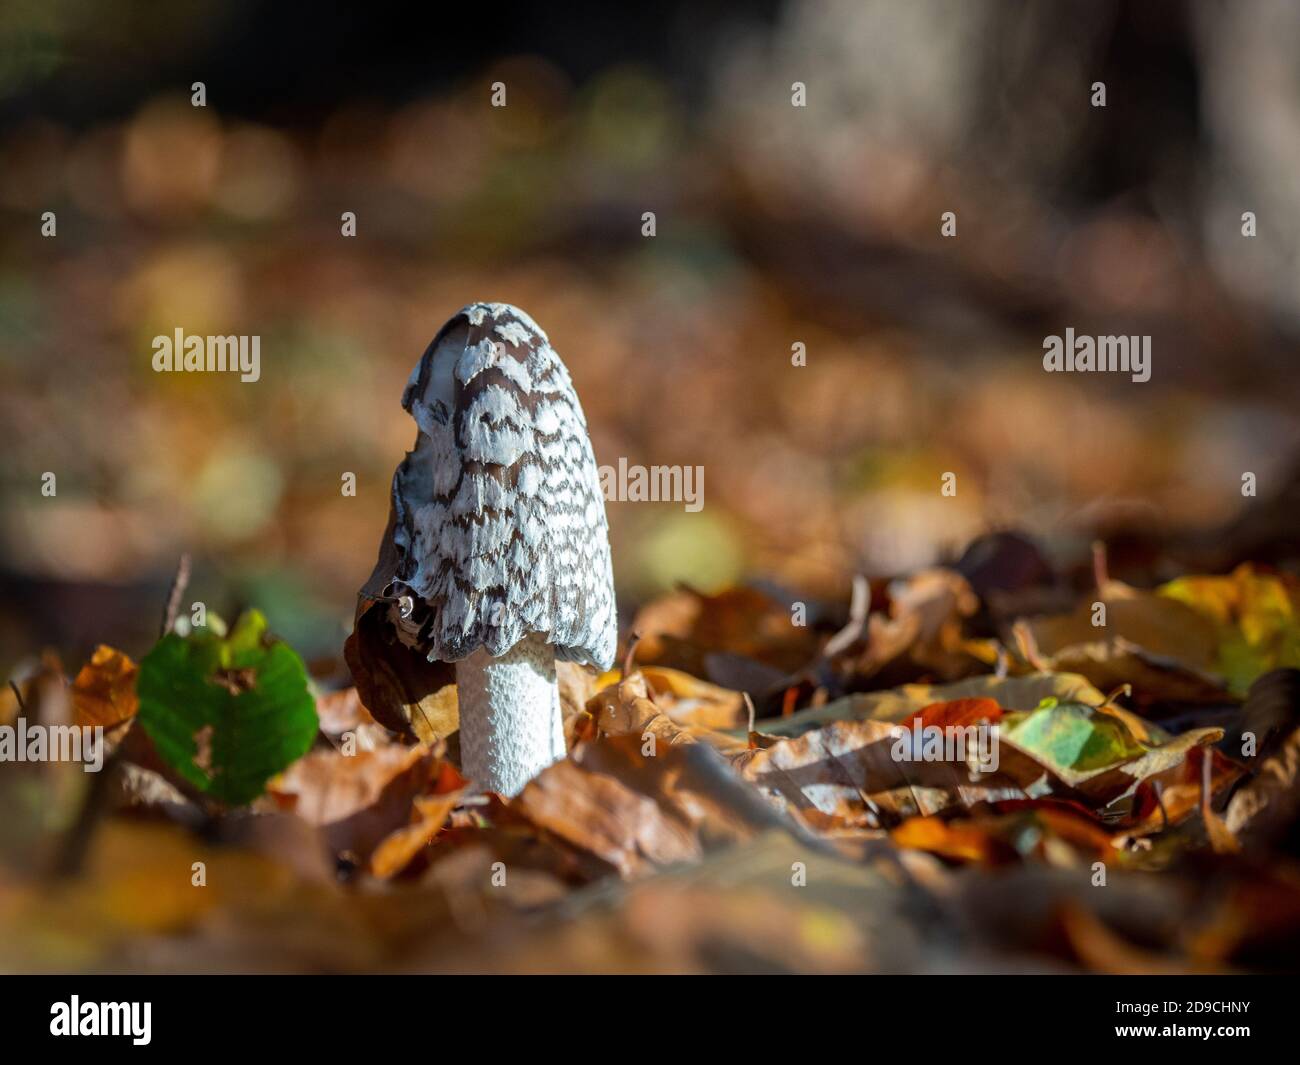 OLYMPUS DIGITAL a Tintling mushroom stands on a leaf-covered forest floor Stock Photo